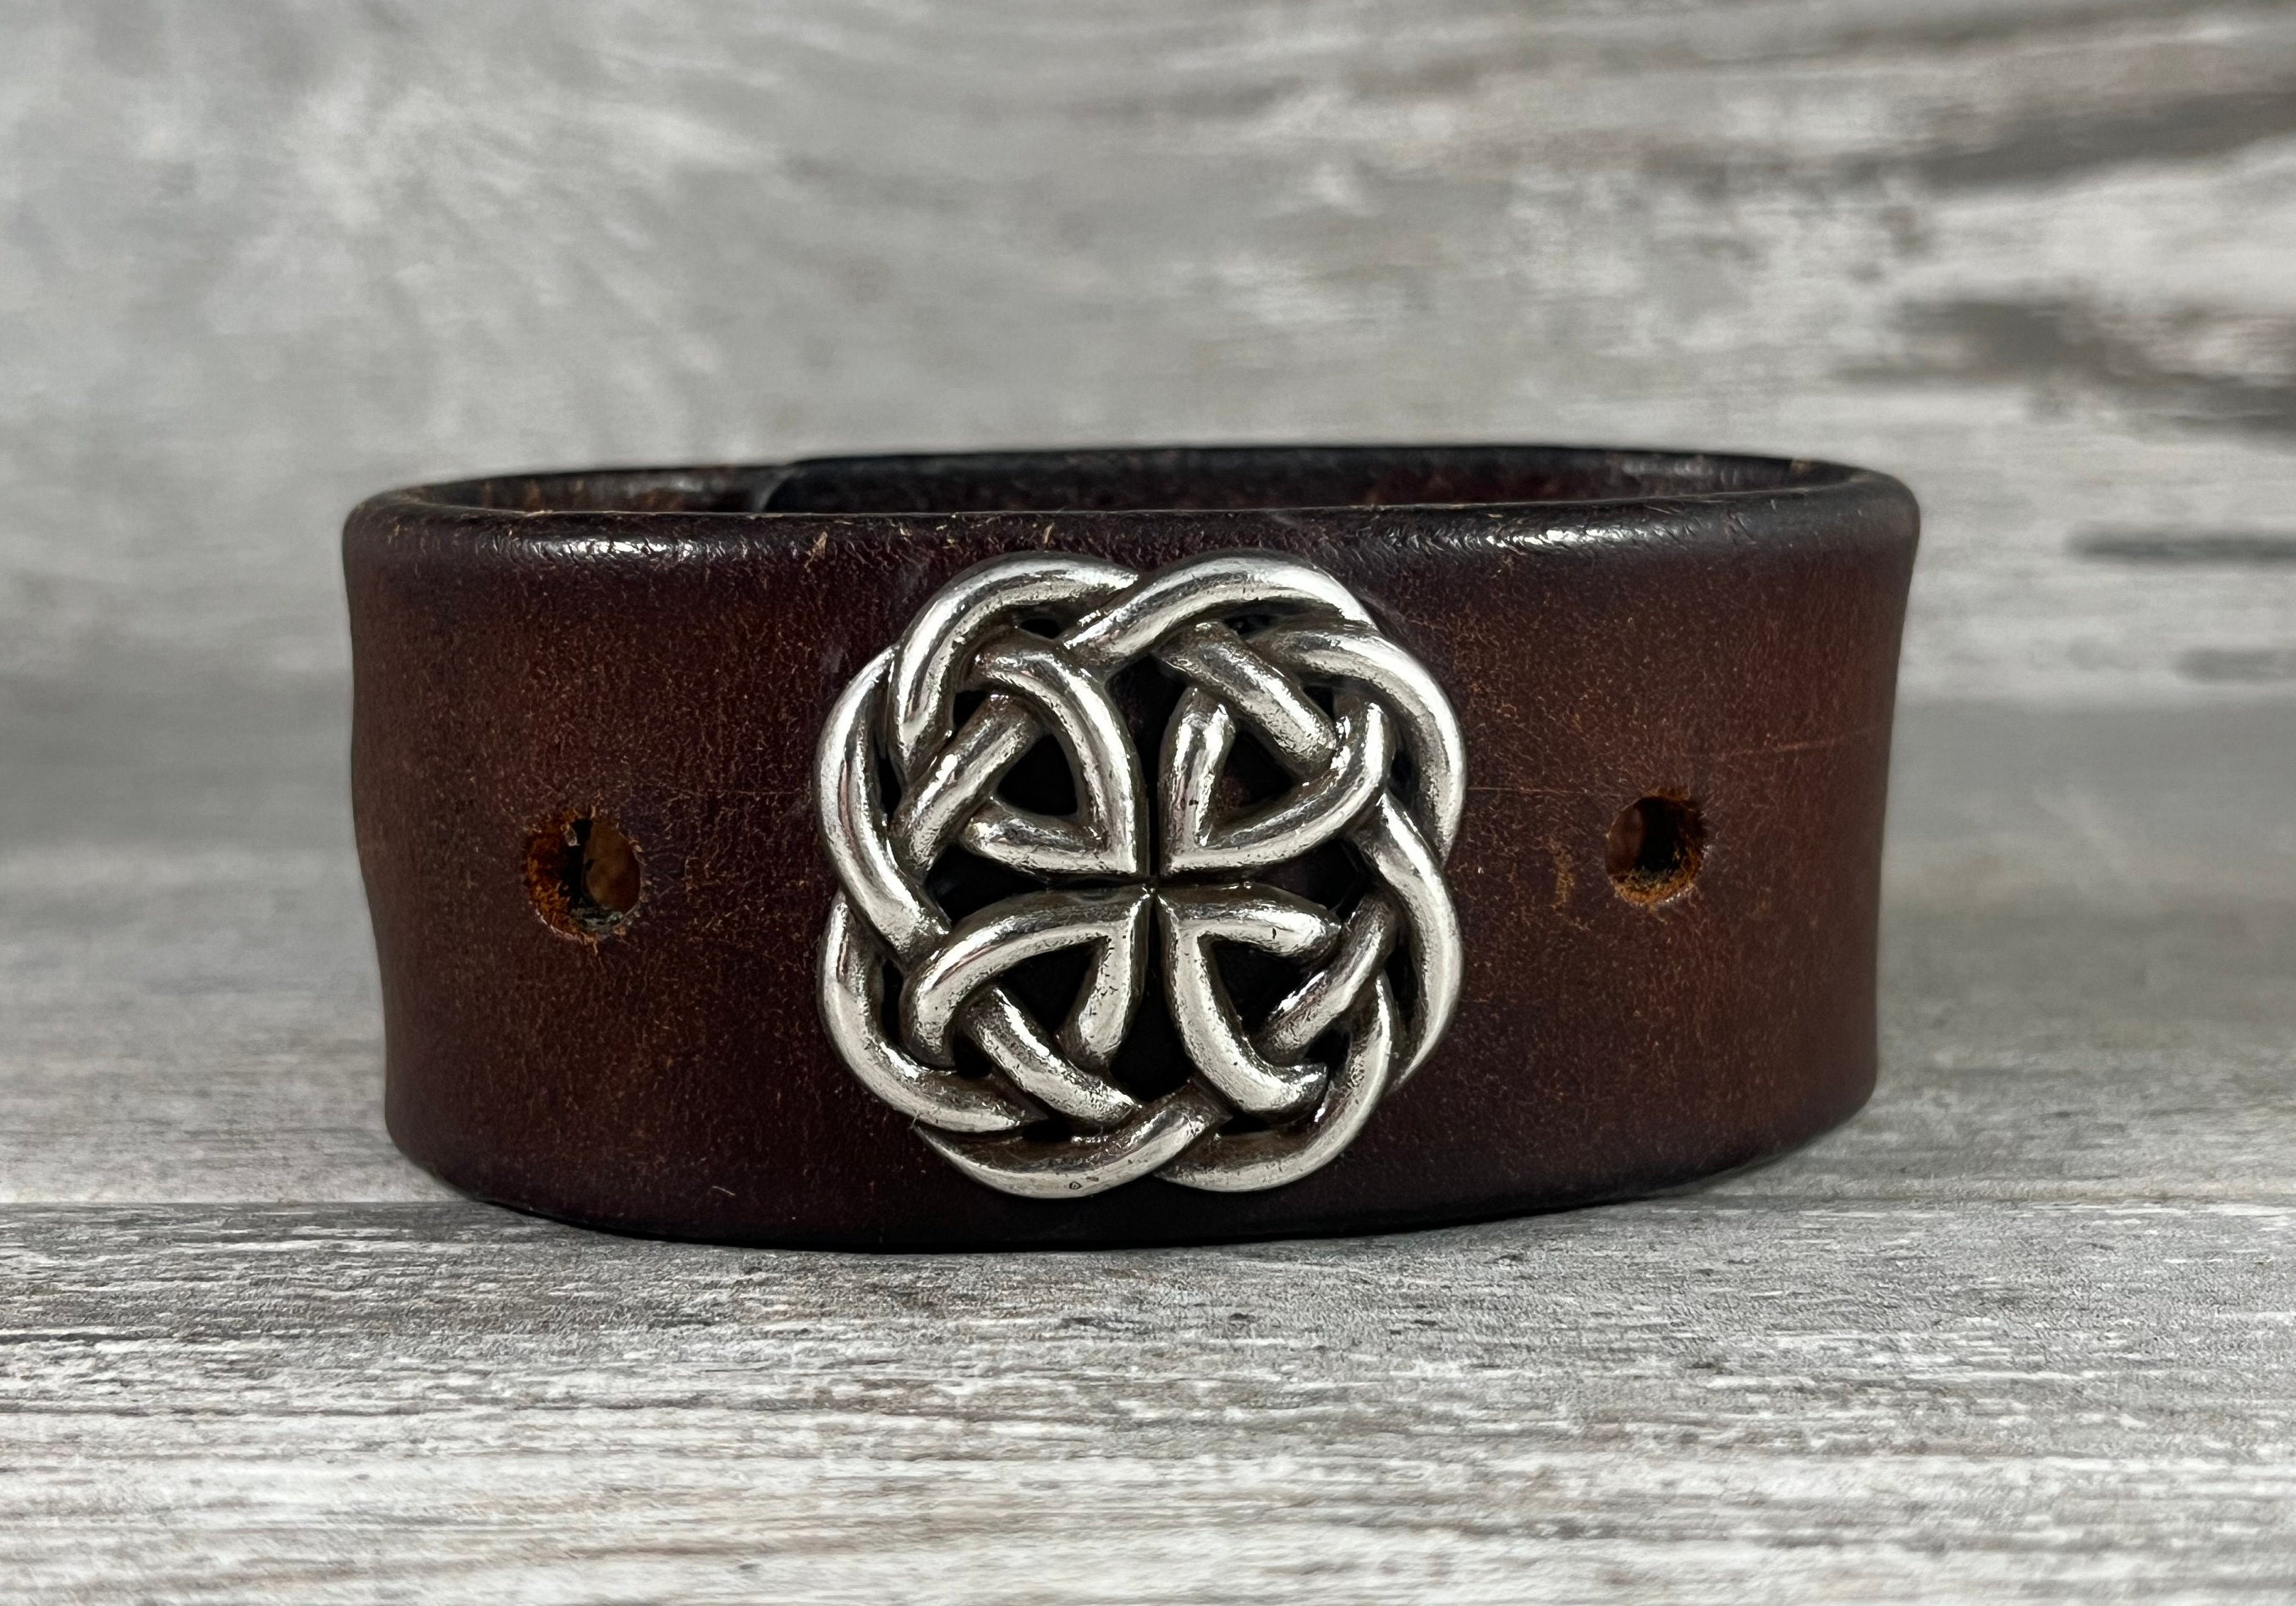 Tree of Life, Copper & Leather Cuff Bracelet, Unisex Jewelry, Hand Carved,  Brown Leather Adjustable Cuff, Size 6.75-8, Earthy Rustic Jewelry